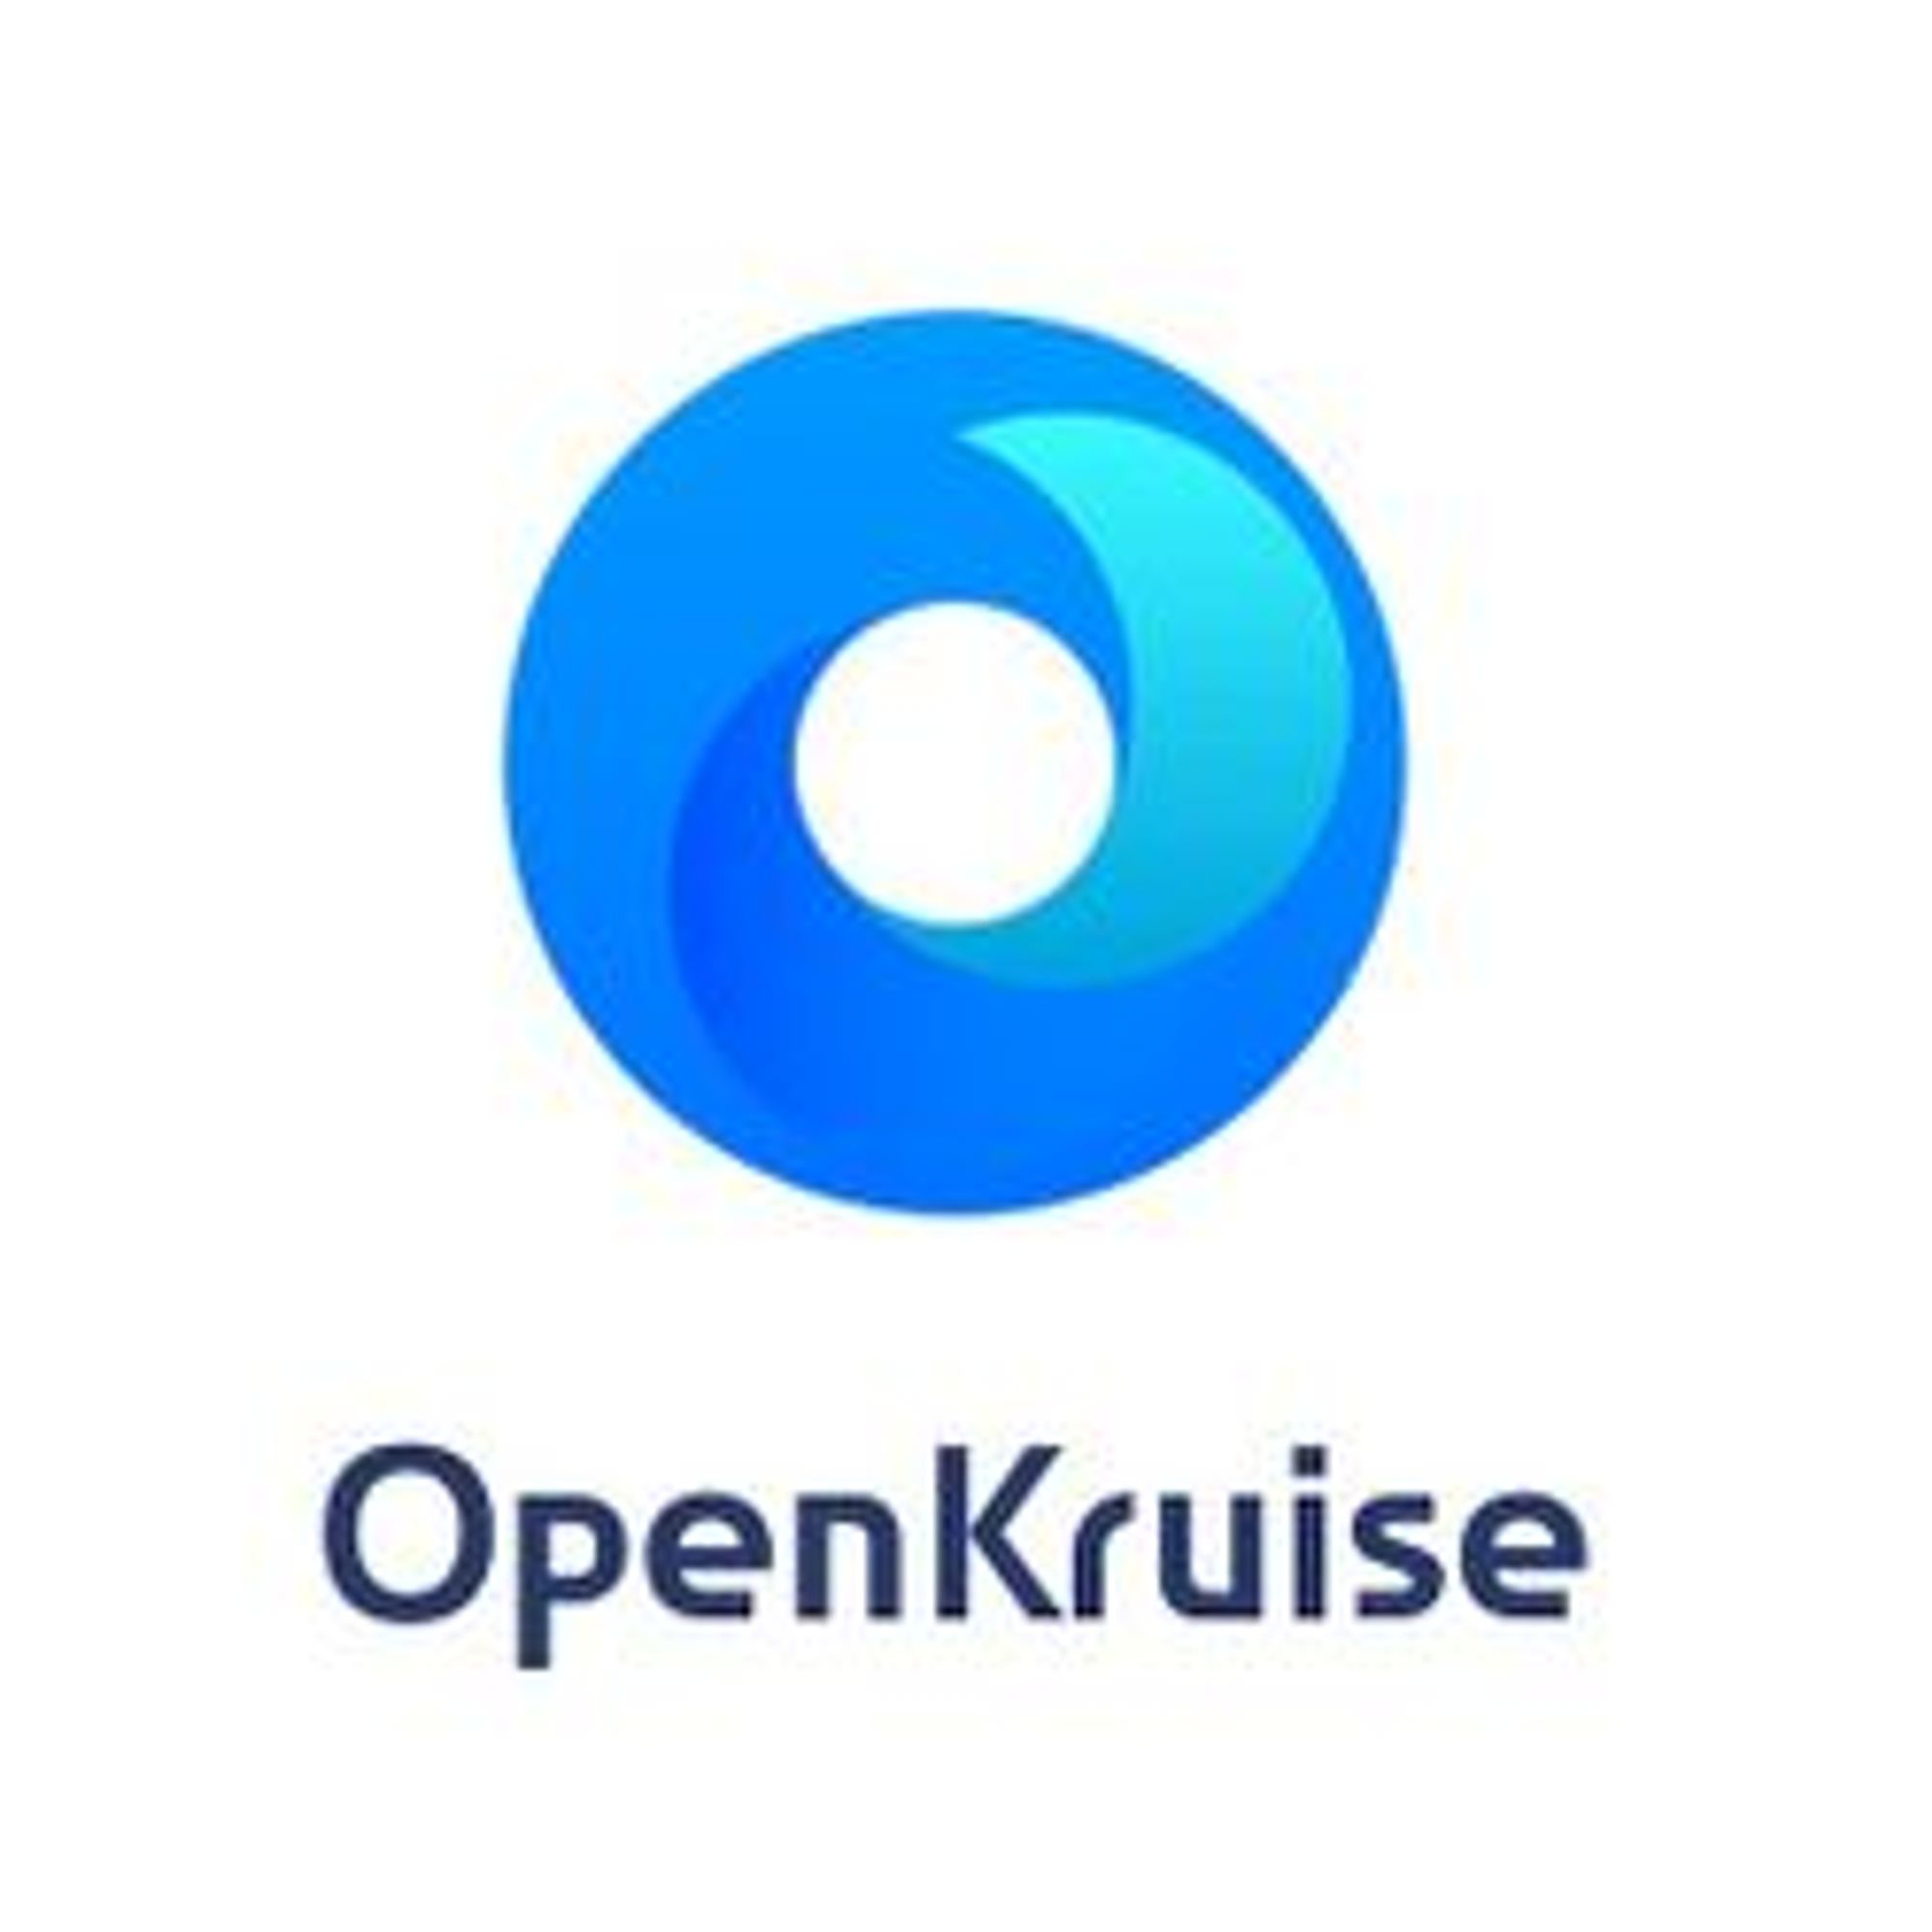 OpenKruise Source Reading